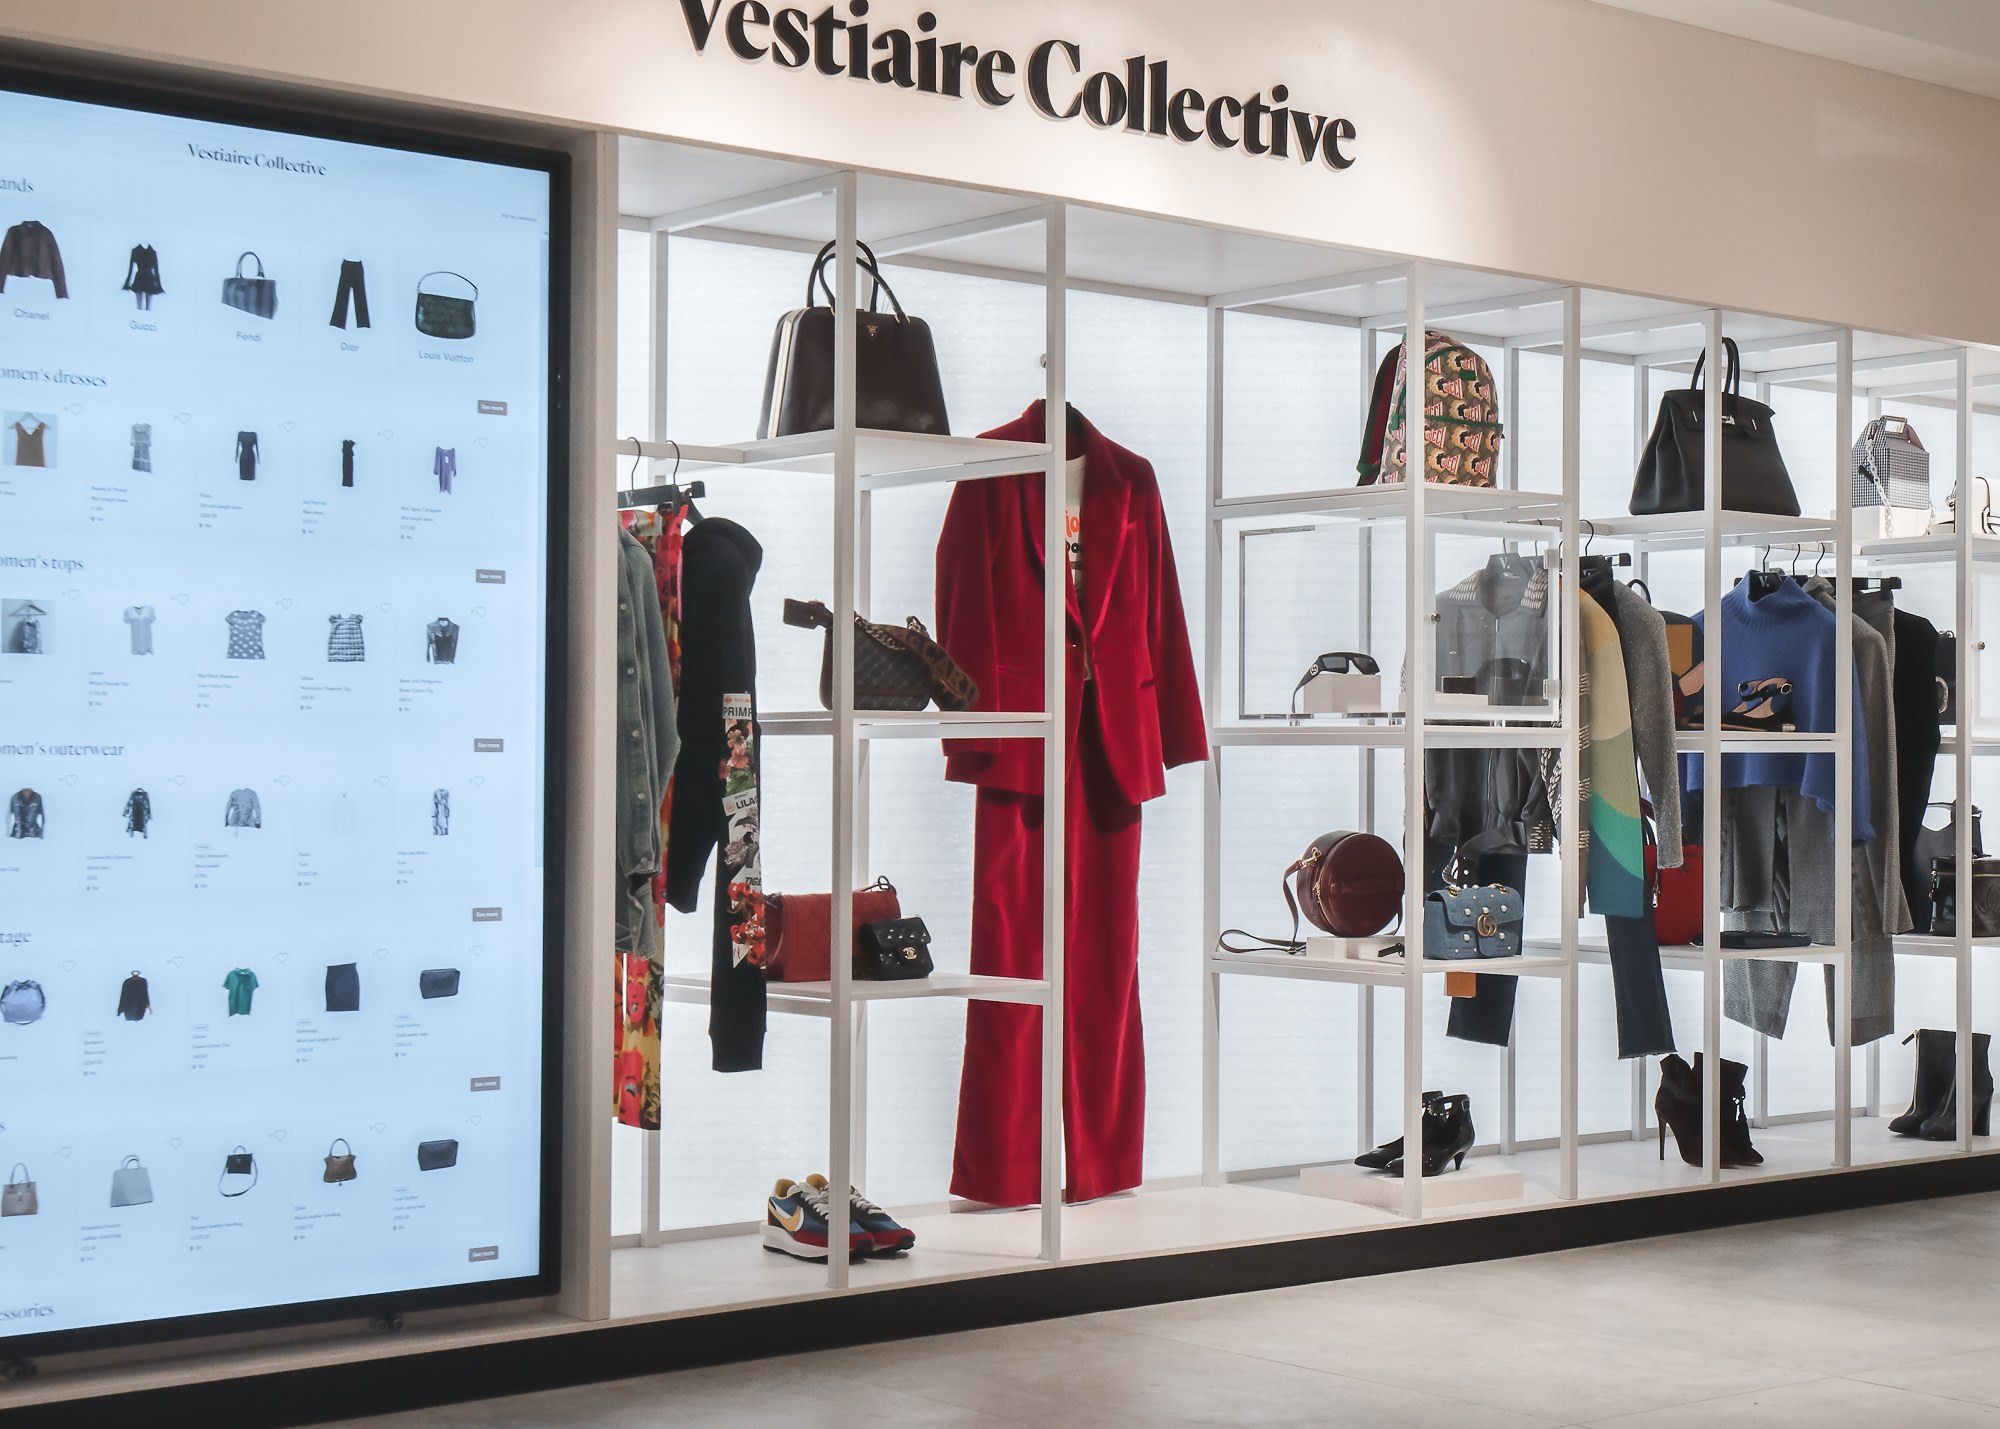 Vestiaire Collective raises €178M to accelerate growth and drive